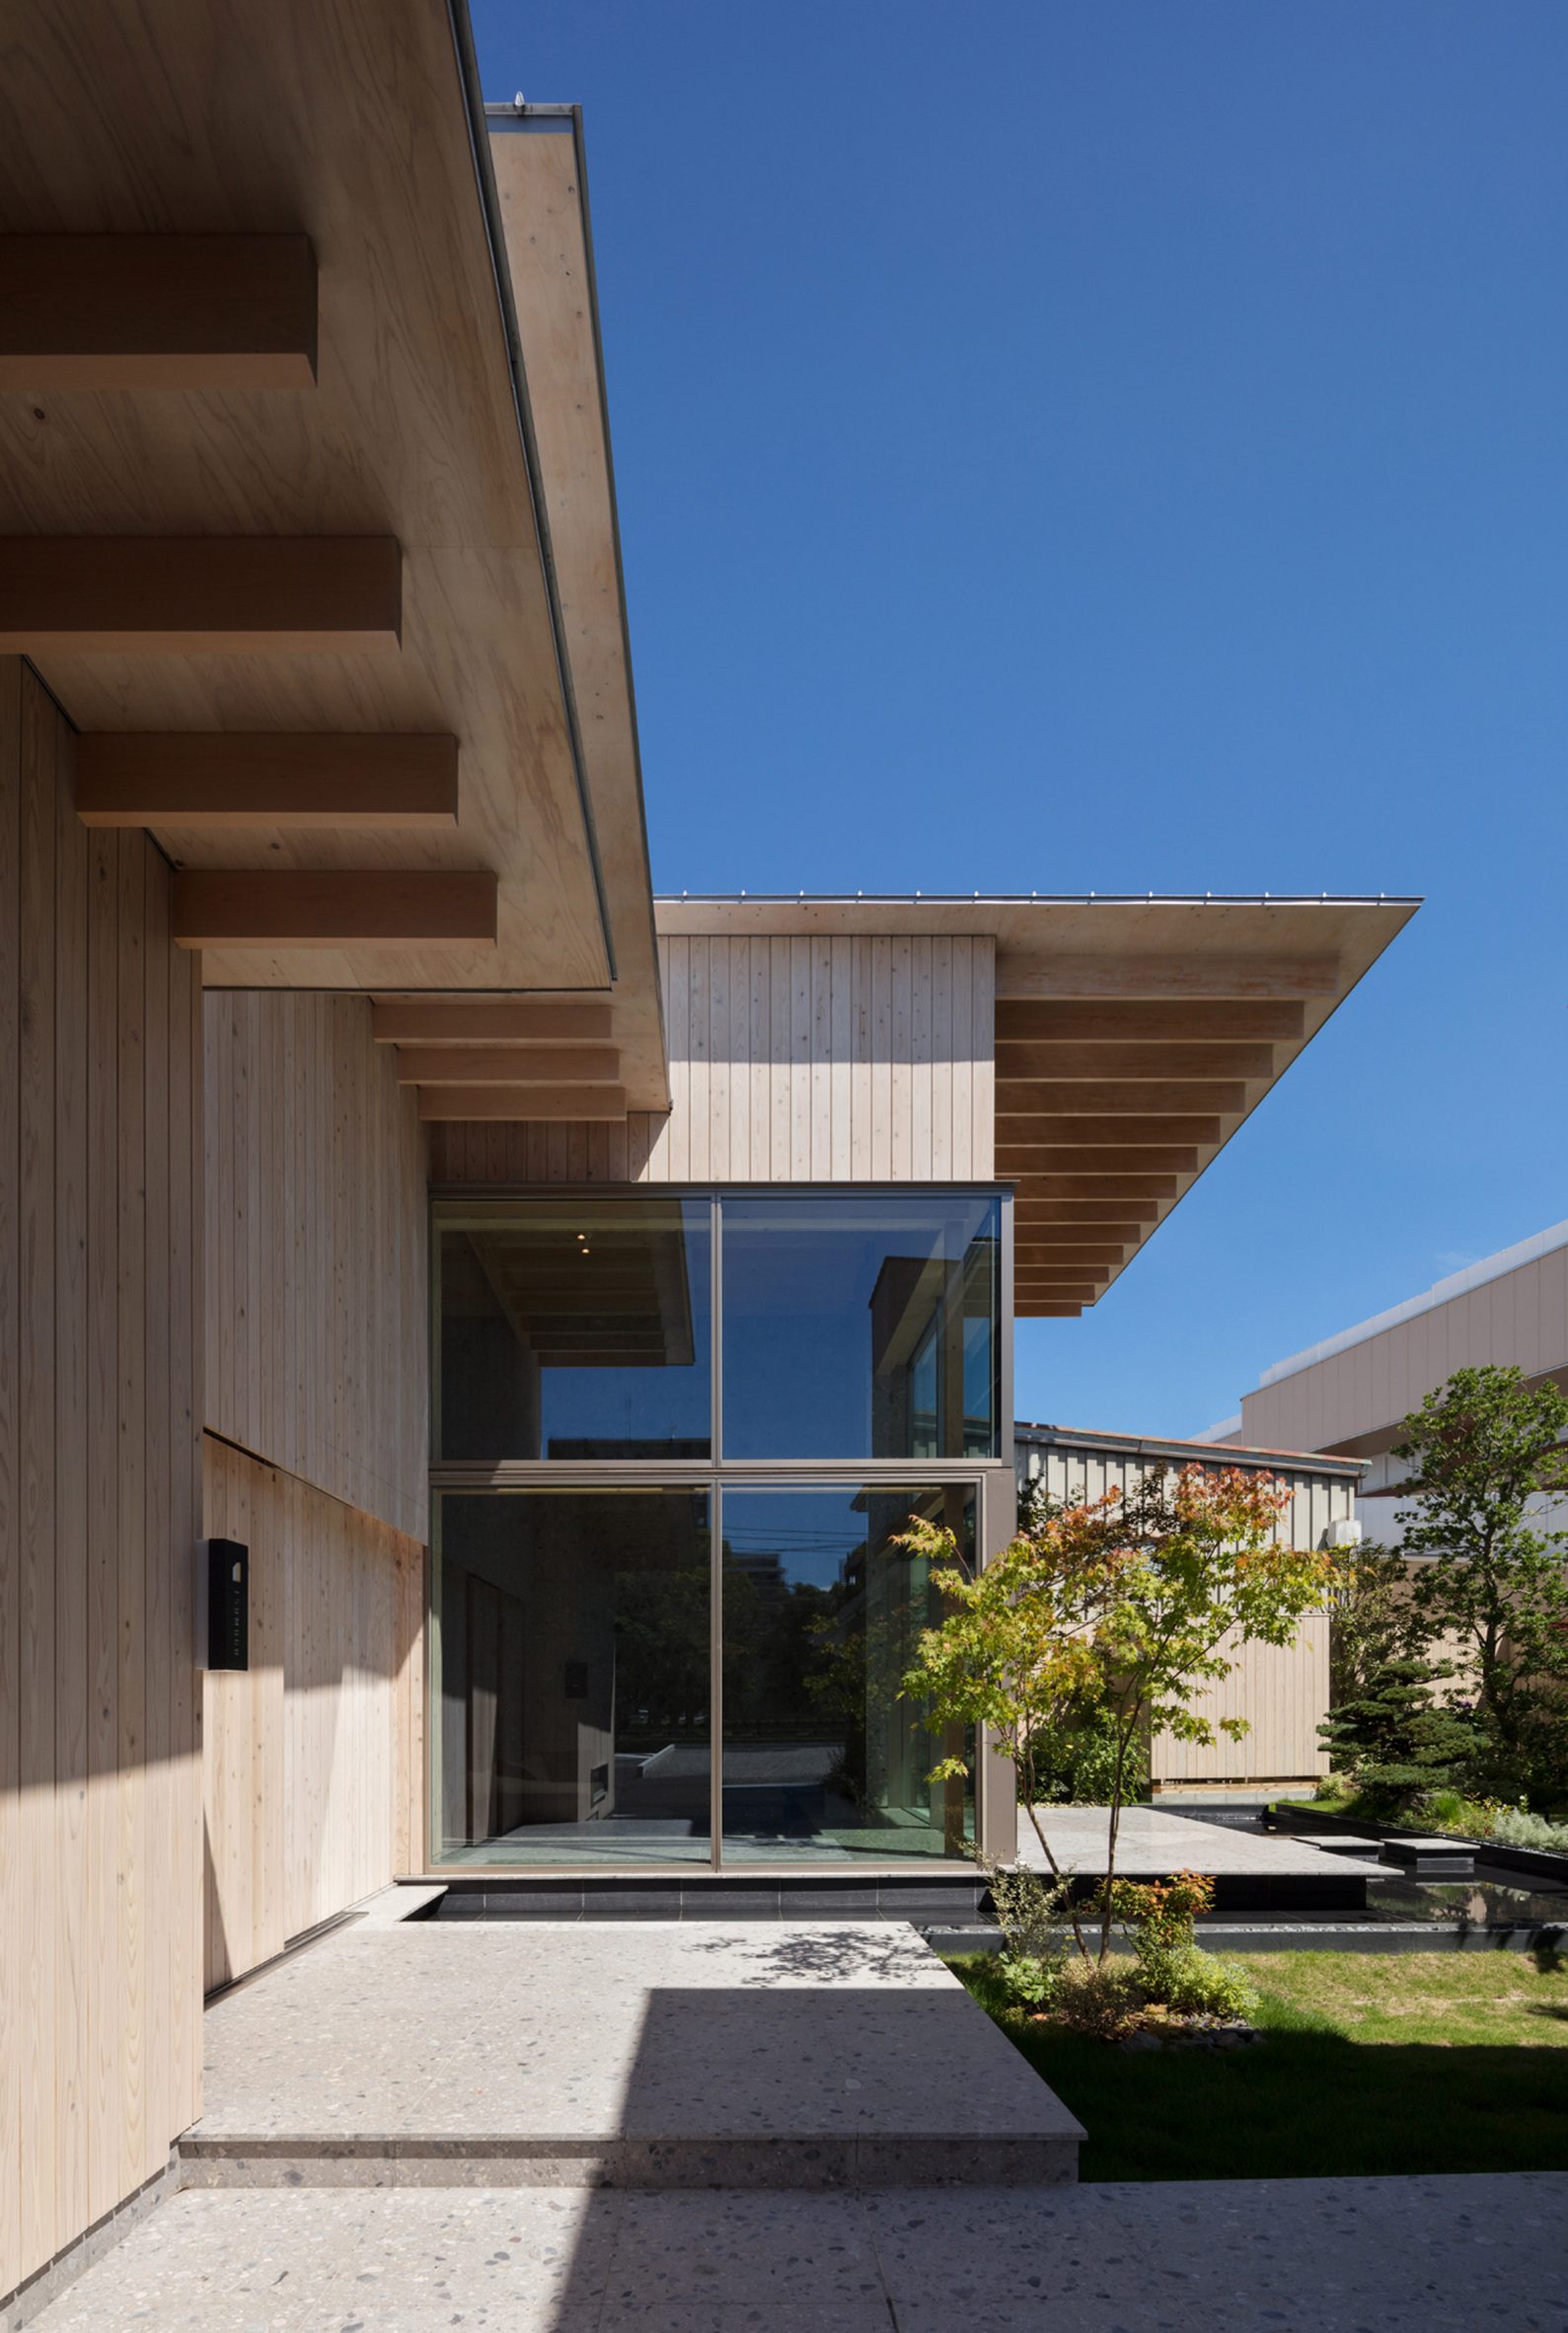 Timber exterior of Japanese home by Archipatch with overhangs and glass walls